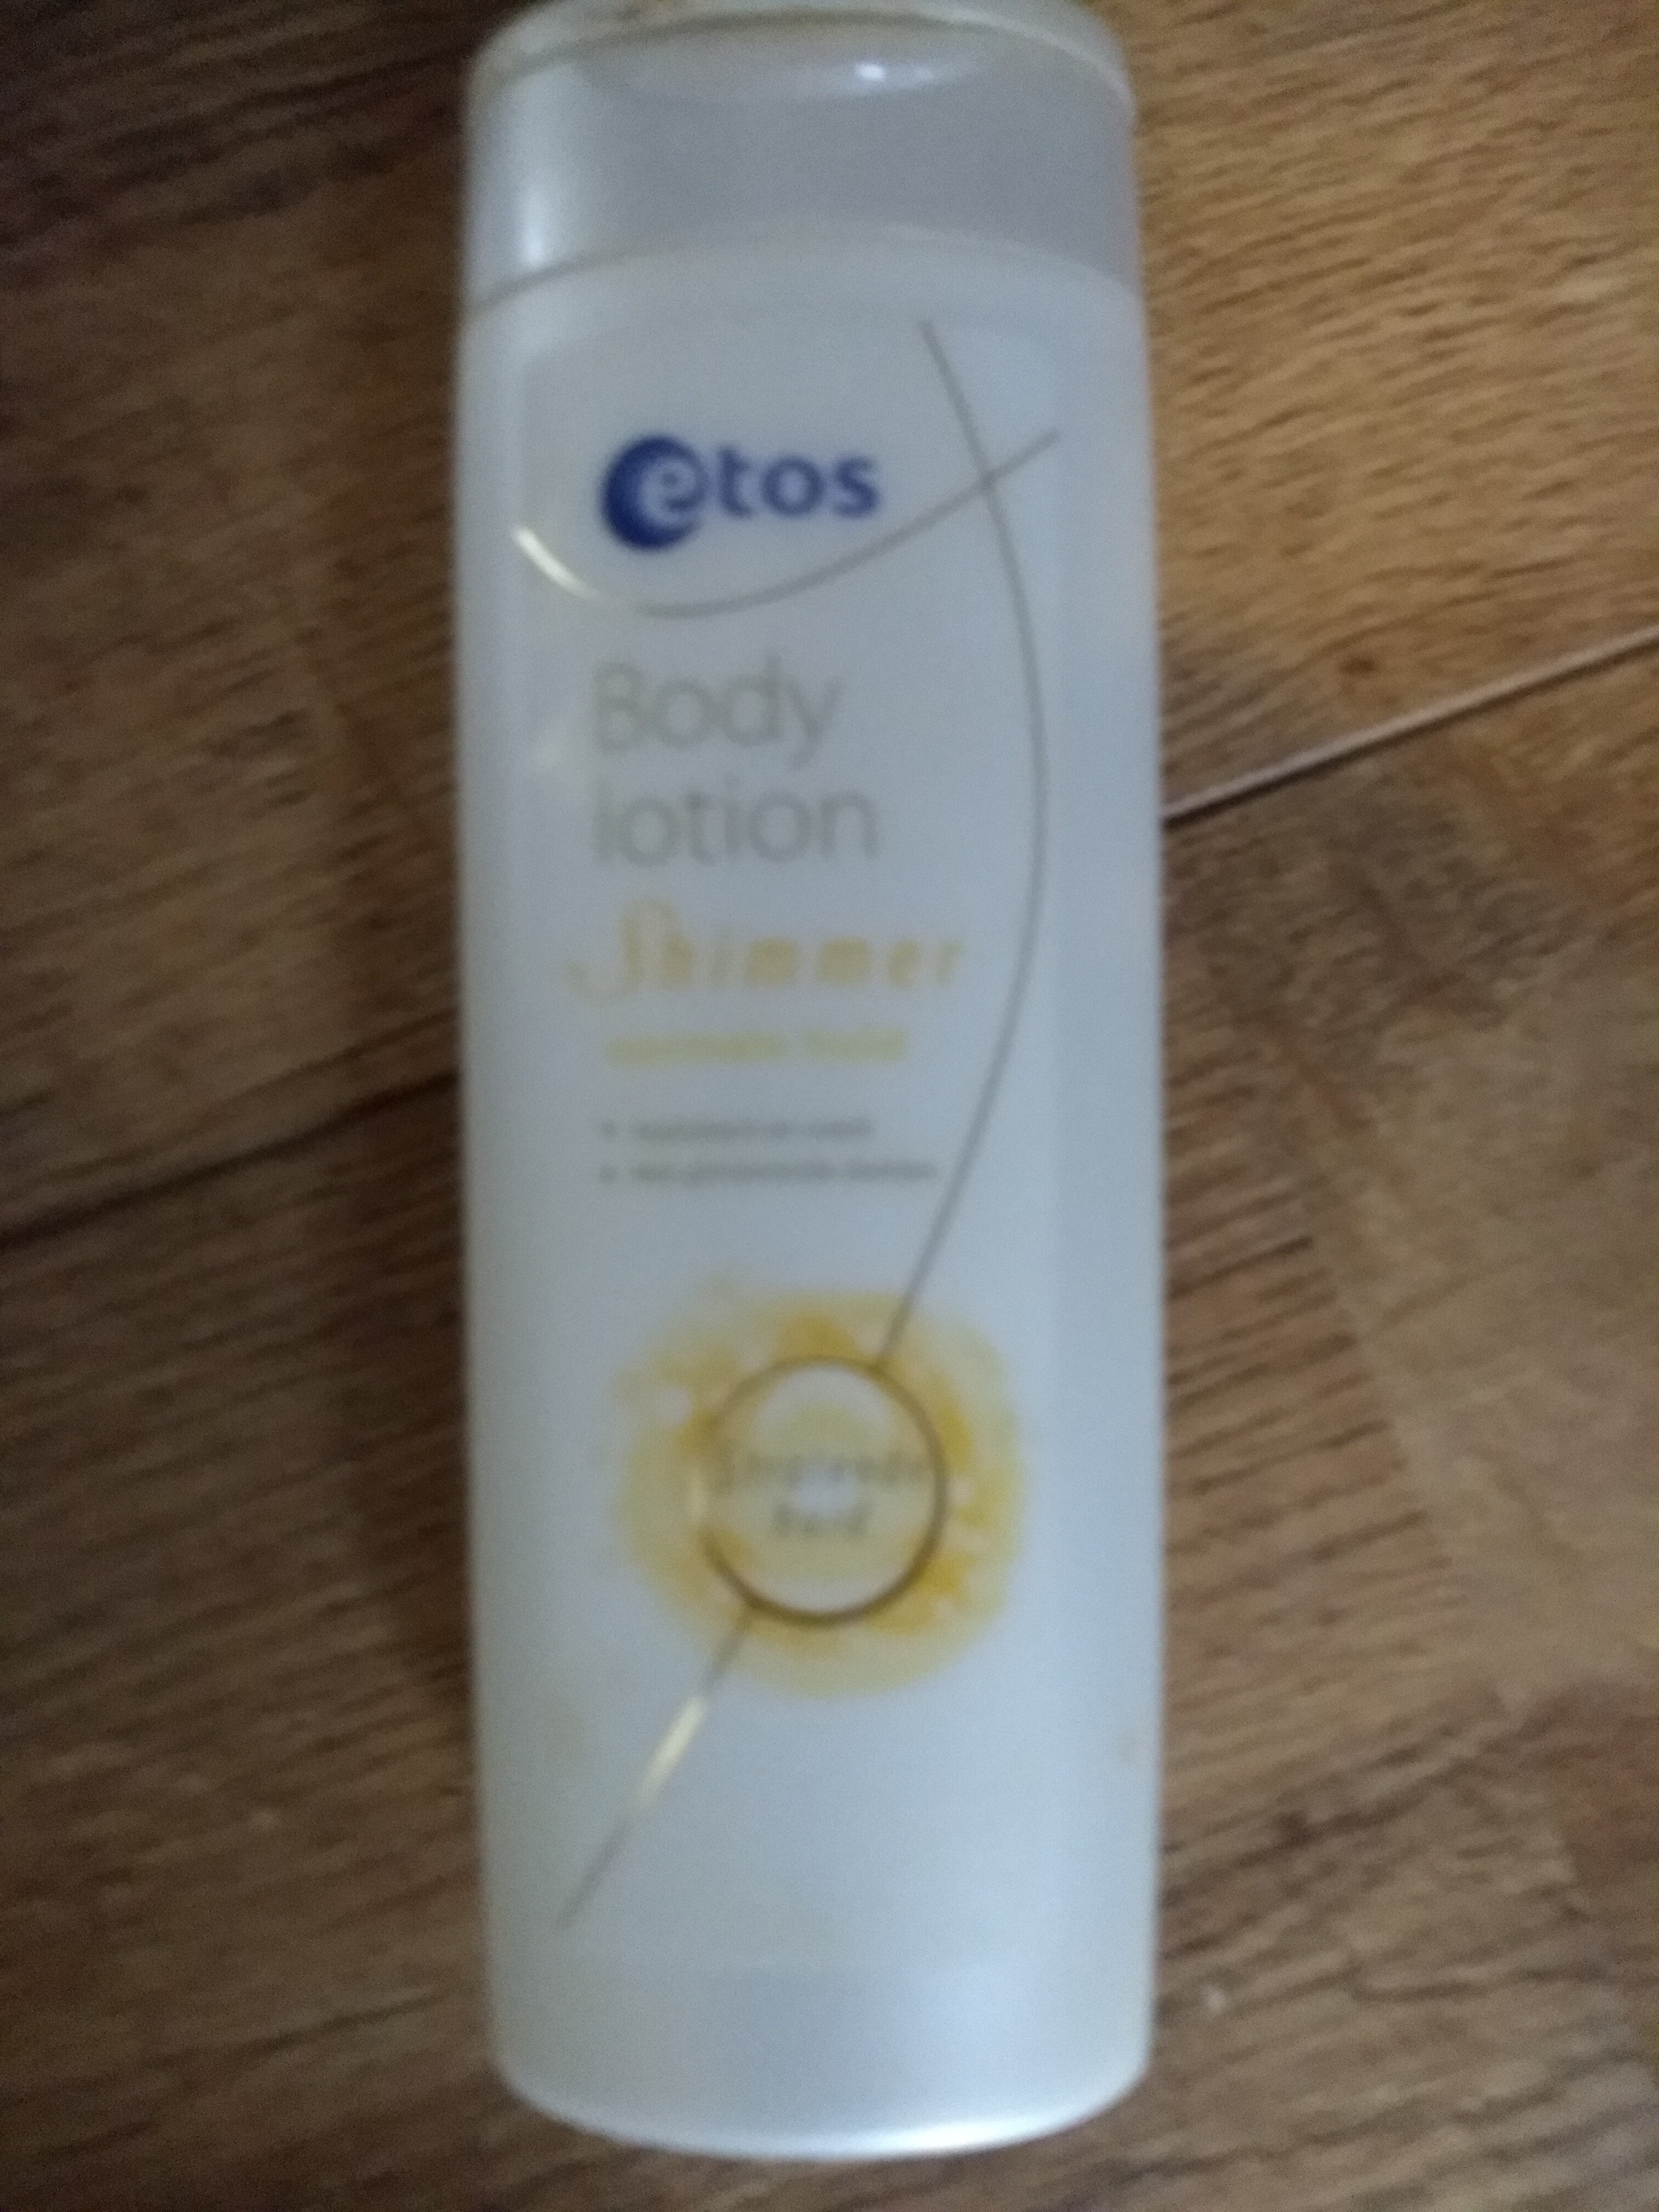 Body lotion - Product - nl